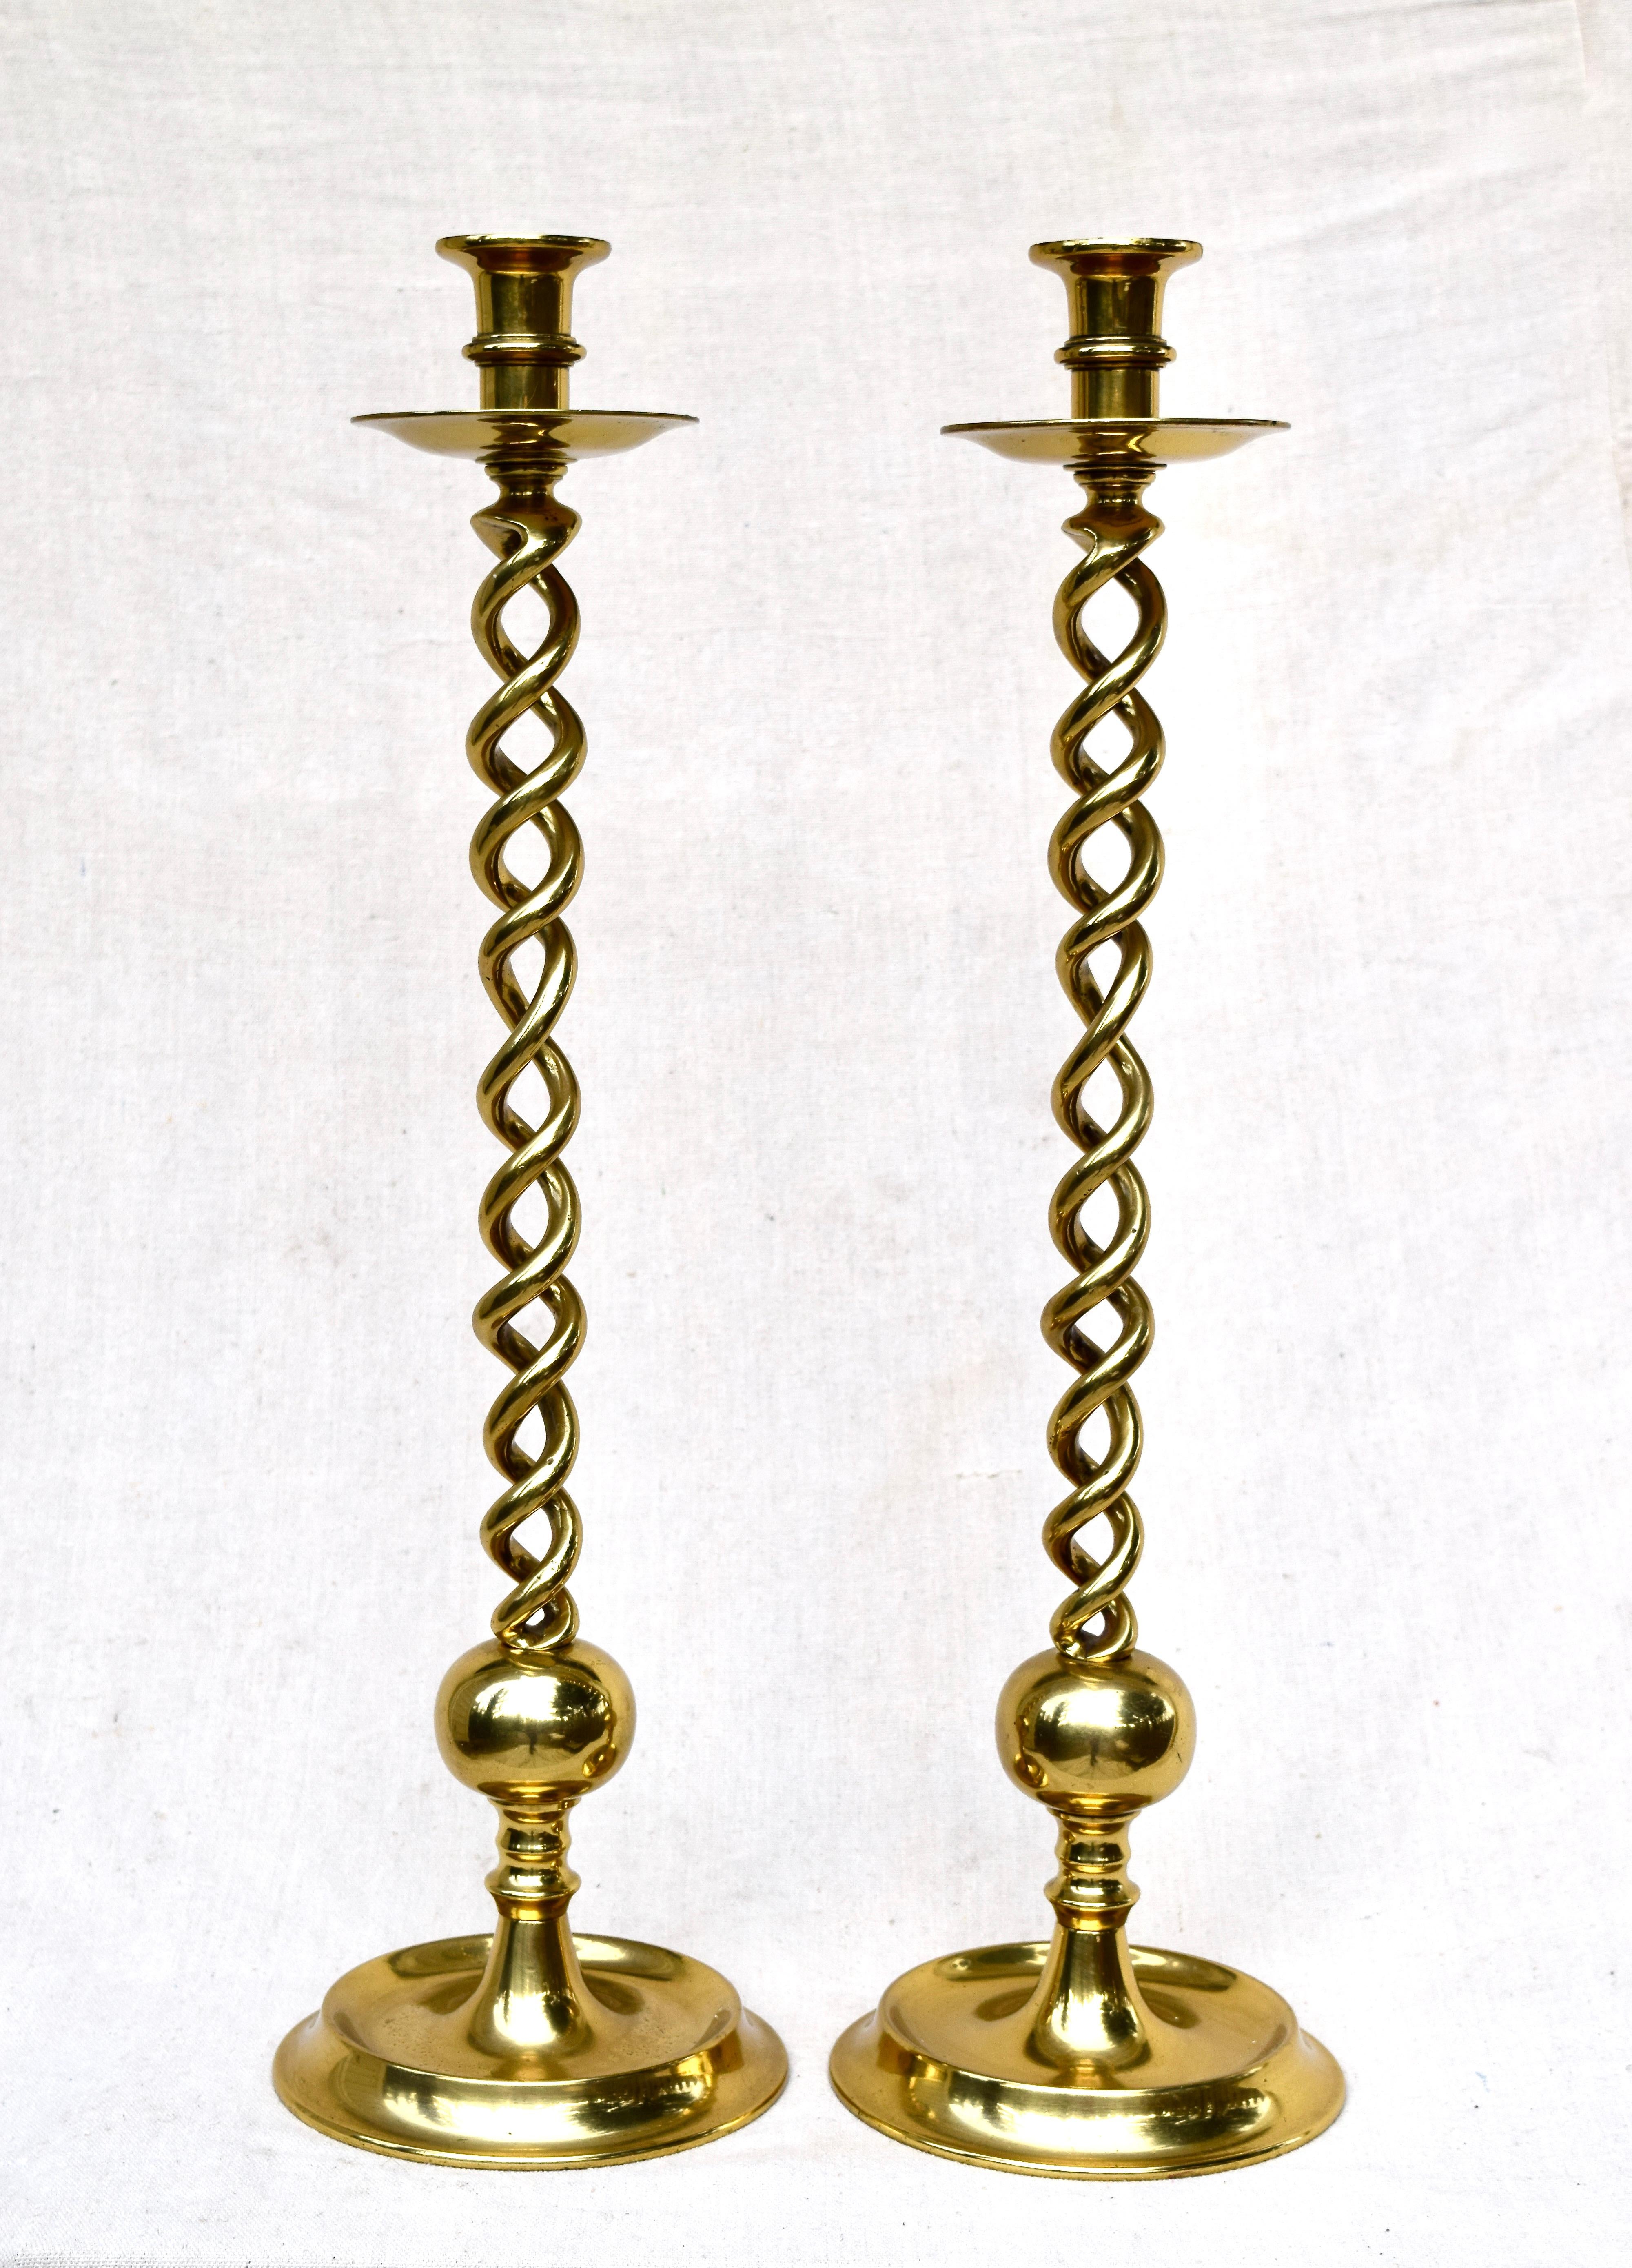 An impressive pair of heavy solid brass open barley-twist candlesticks, early 20th century generous in height at a full 23